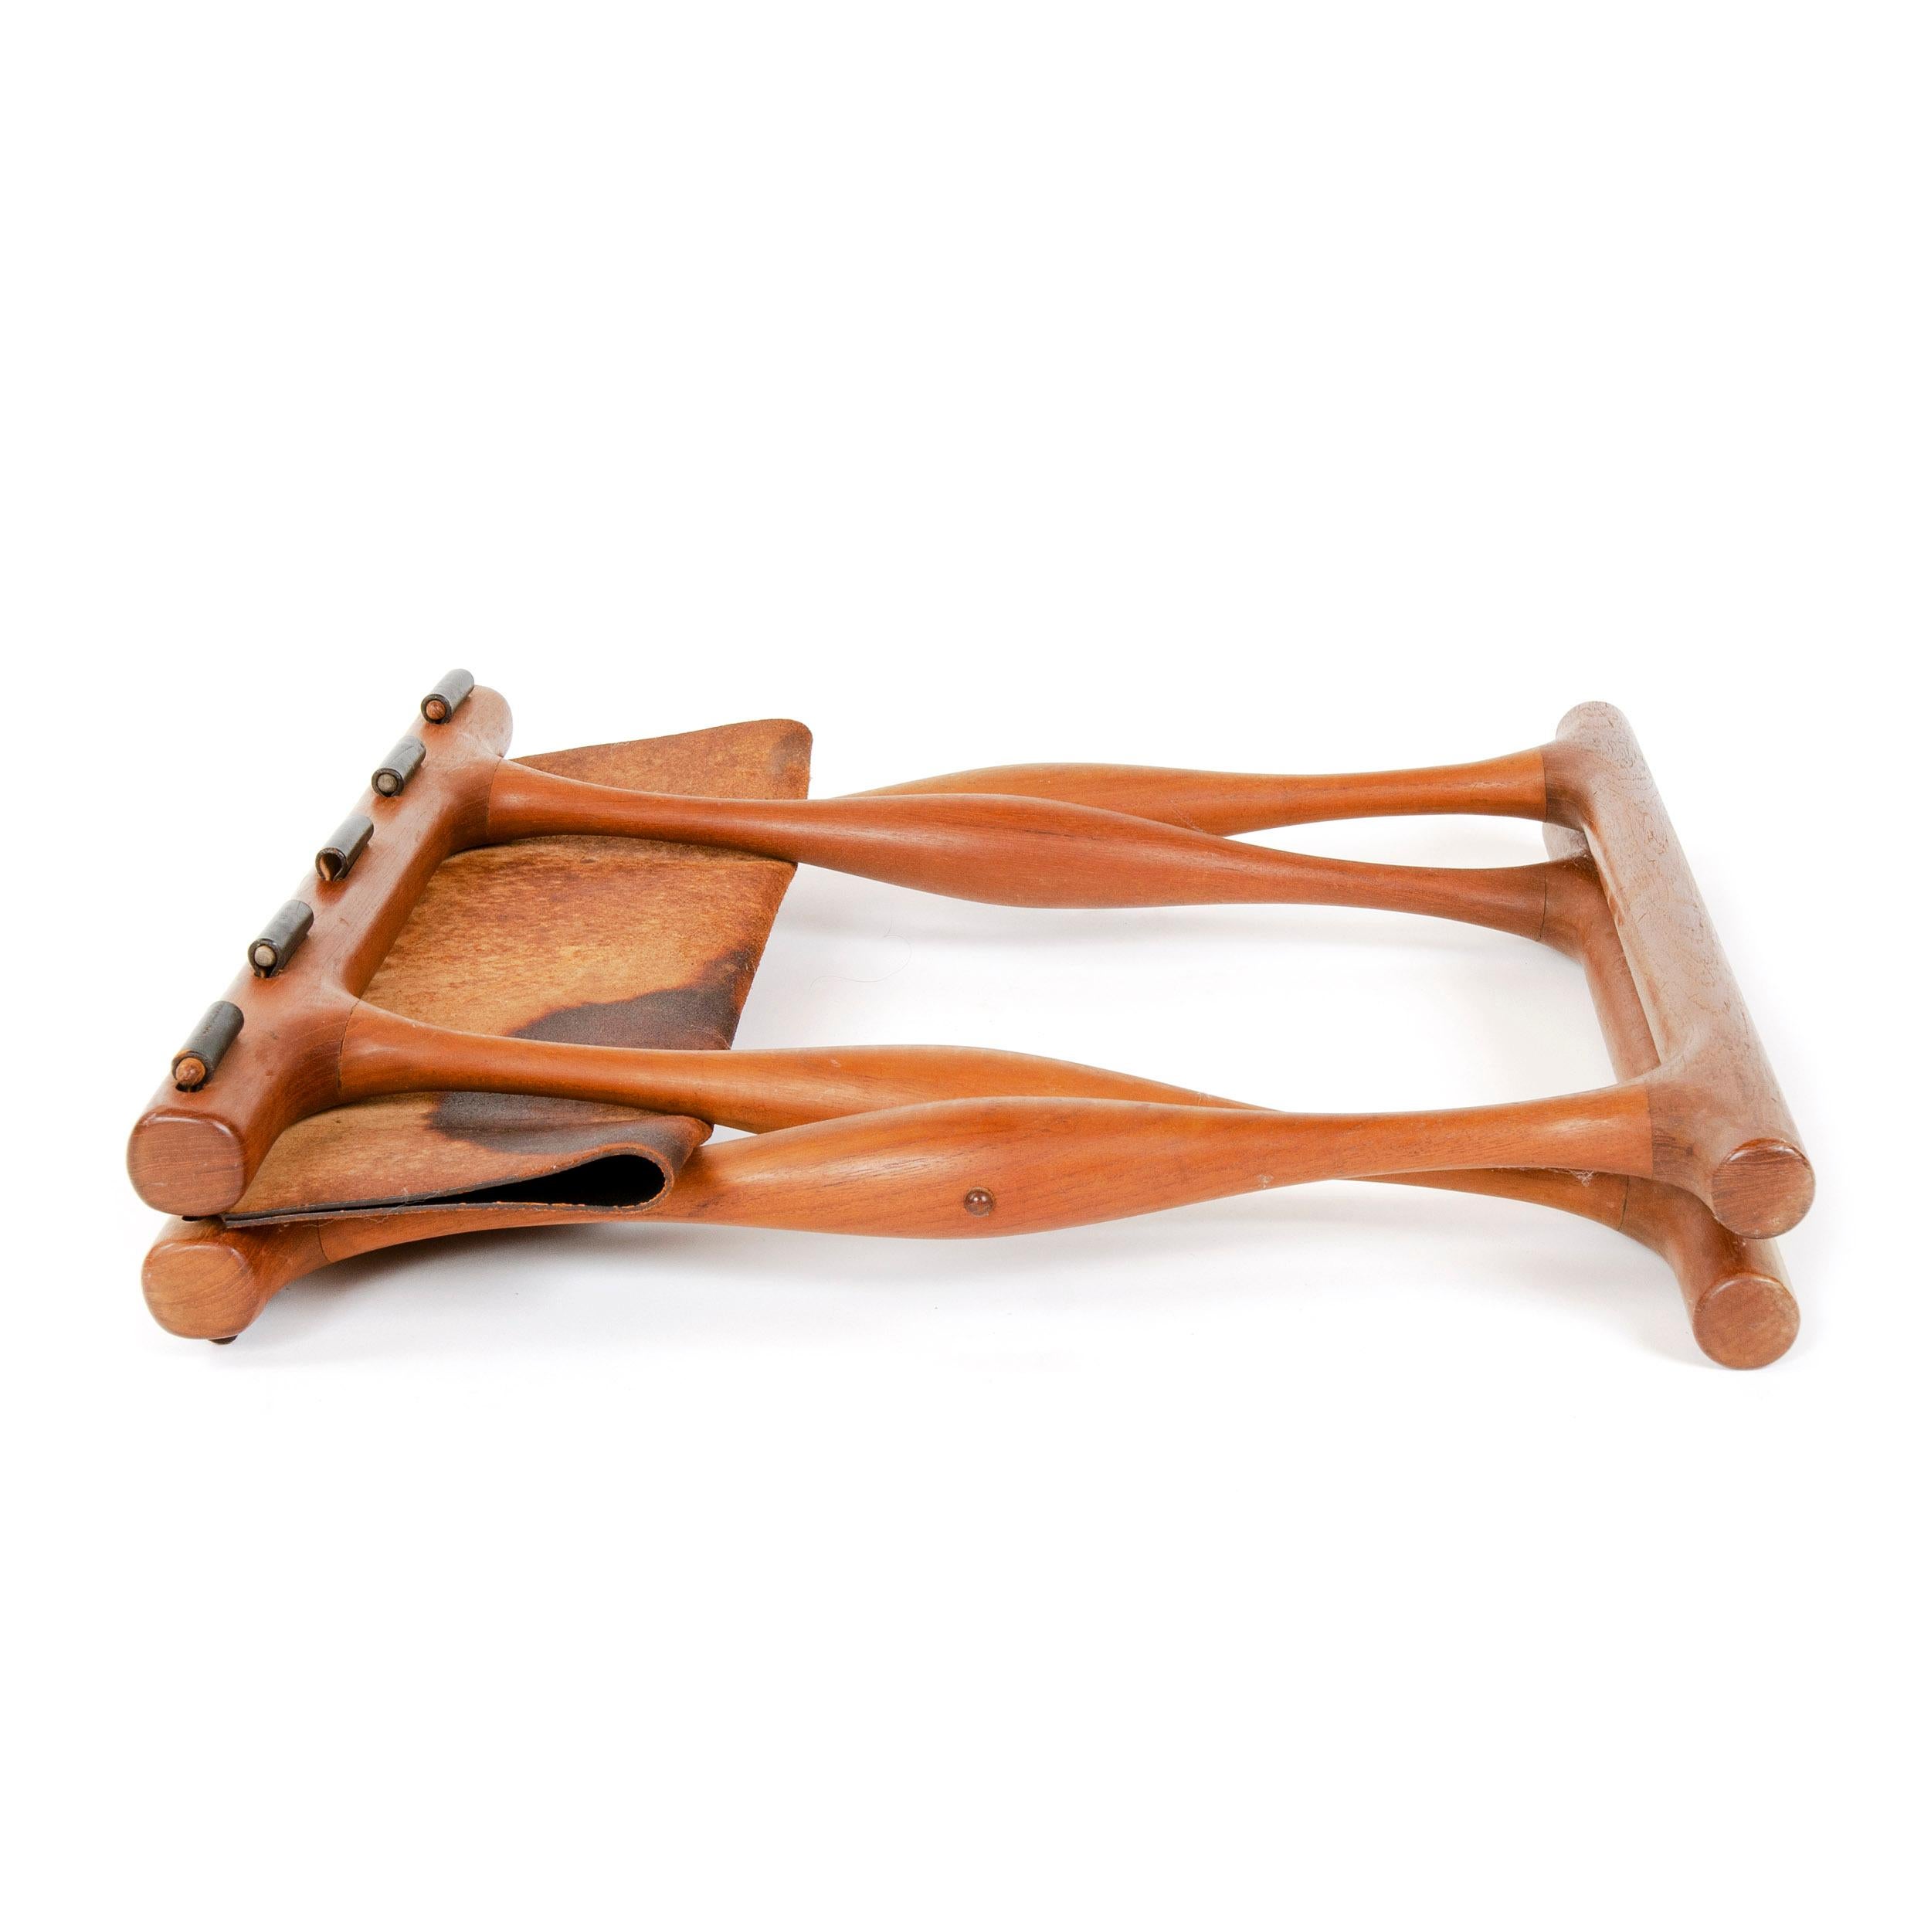 Leather Folding Stool by Poul Hundevad In Good Condition For Sale In Sagaponack, NY